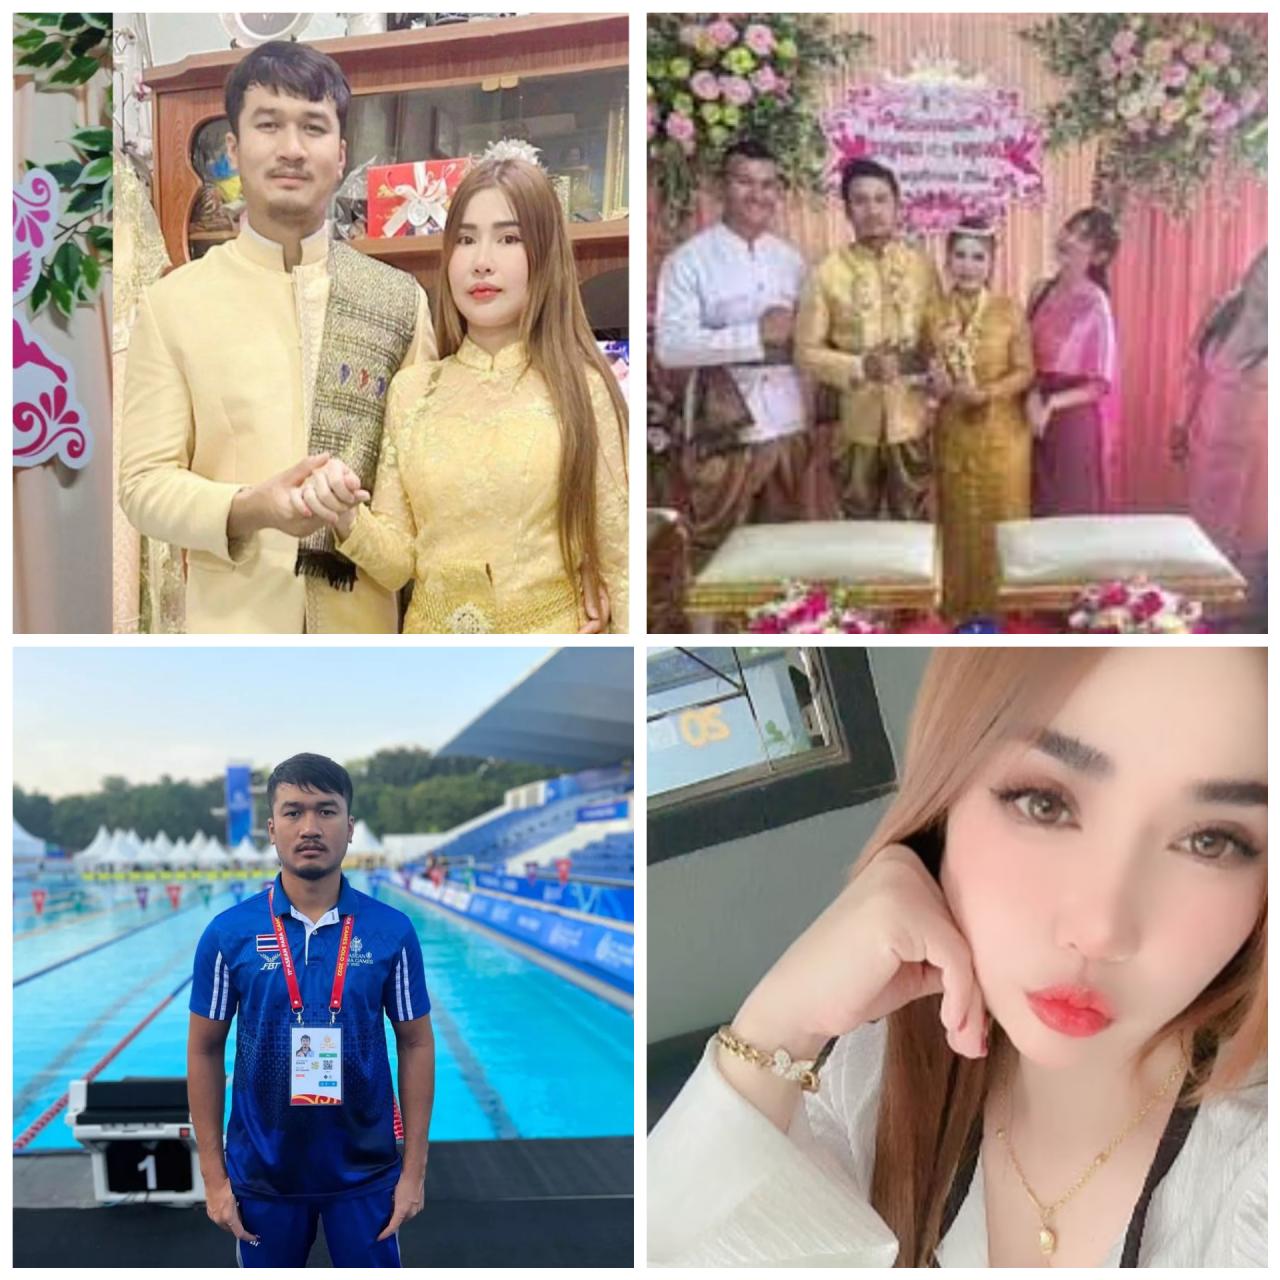 Thai groom kills his bride, her mother, sister and guest at his wedding then commits suicide